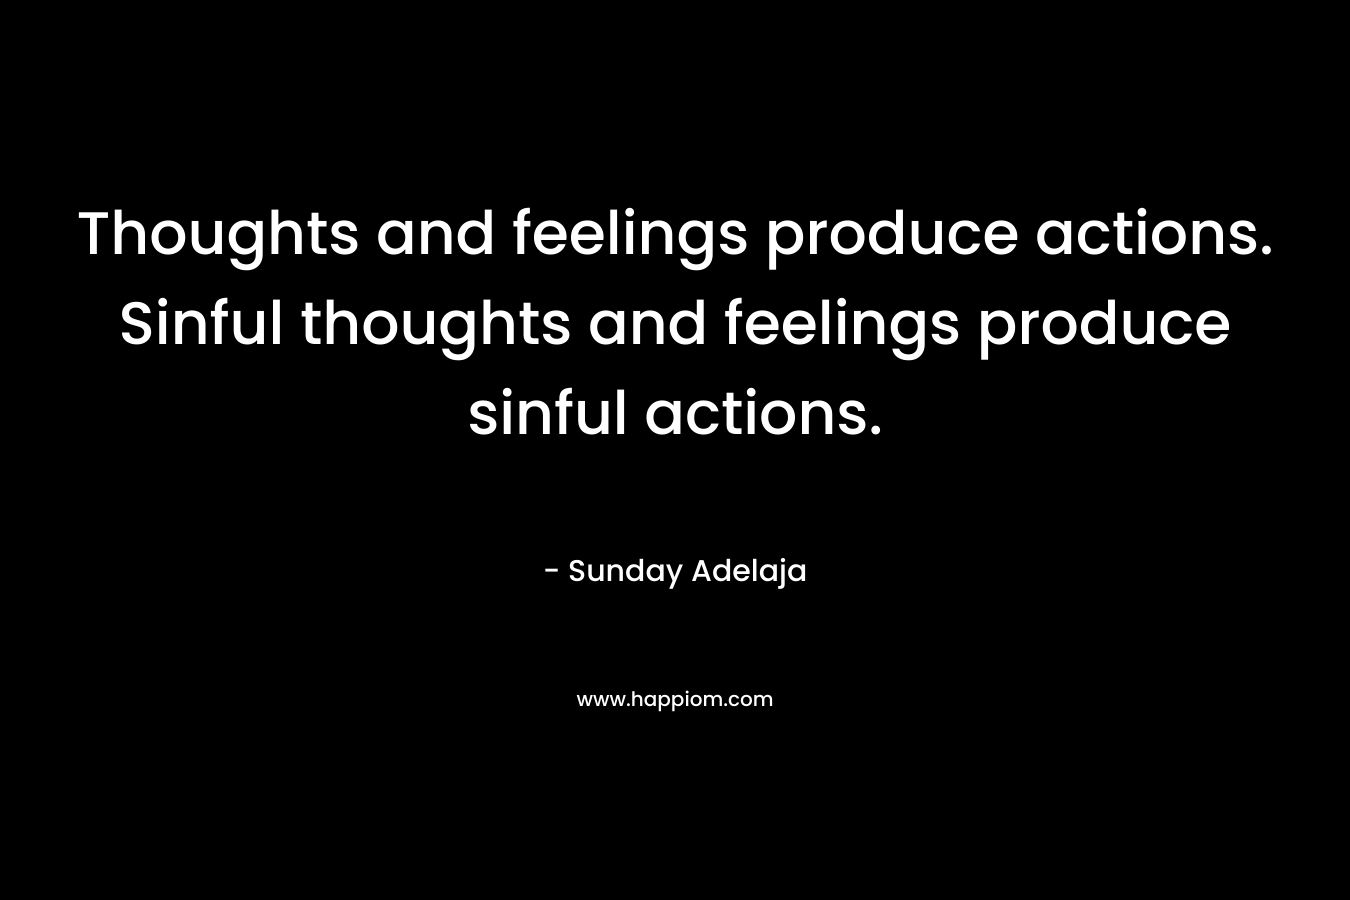 Thoughts and feelings produce actions. Sinful thoughts and feelings produce sinful actions.